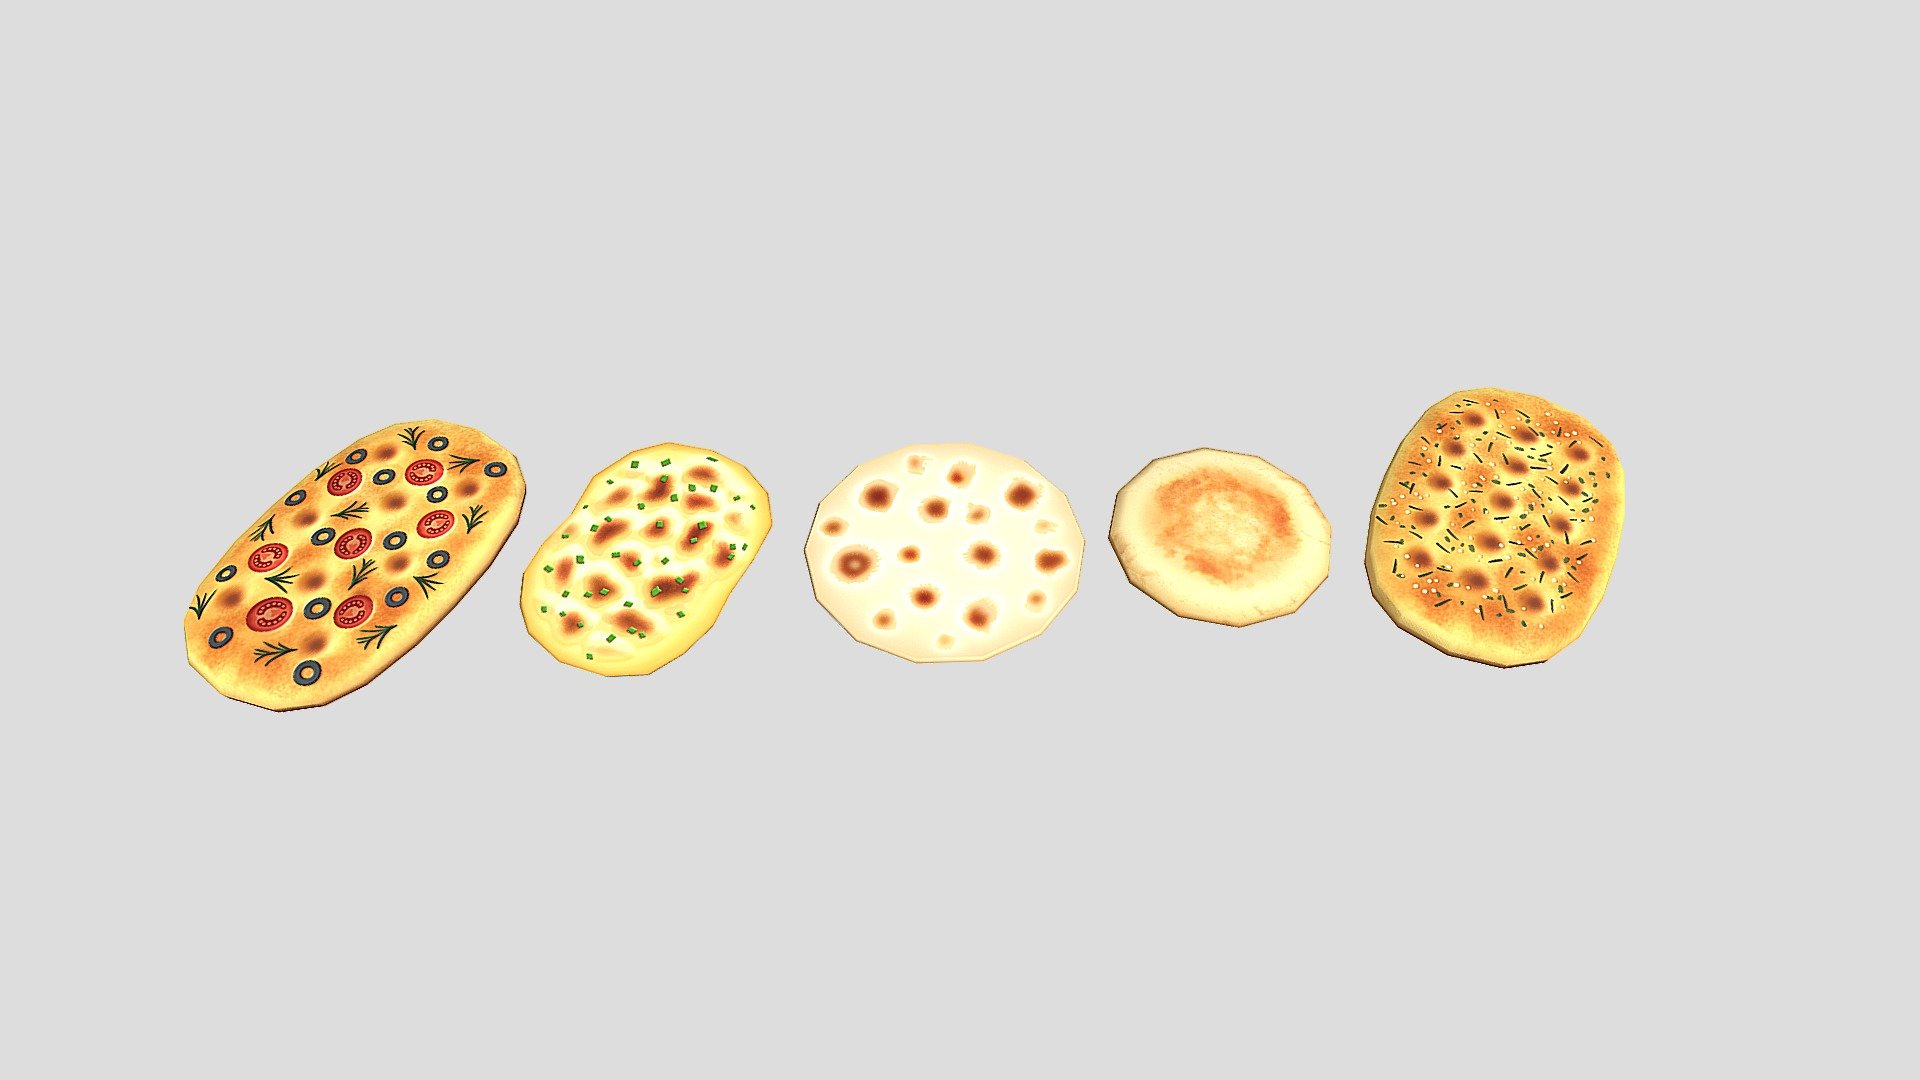 Focaccia - a traditional Italian flatbread or bread made from yeast, unleavened or rich dough 3d model